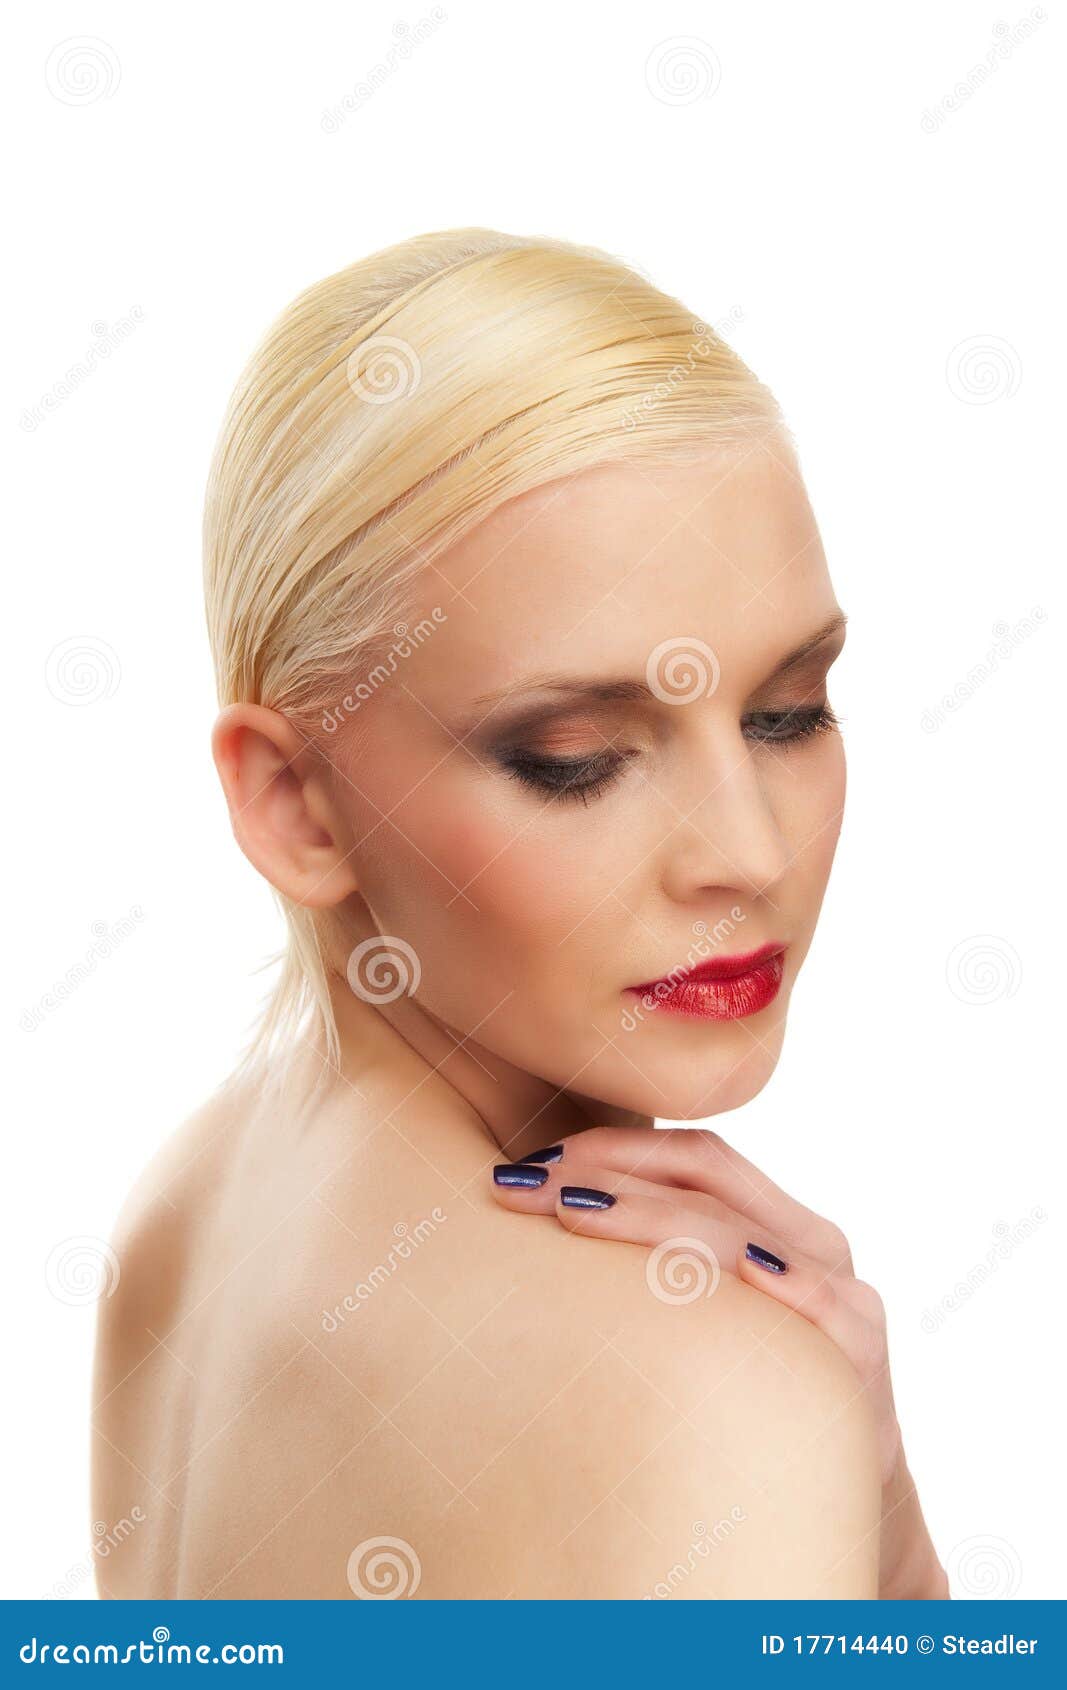 Beautiful Woman With Short Blonde Hair Stock Photo - Image ...